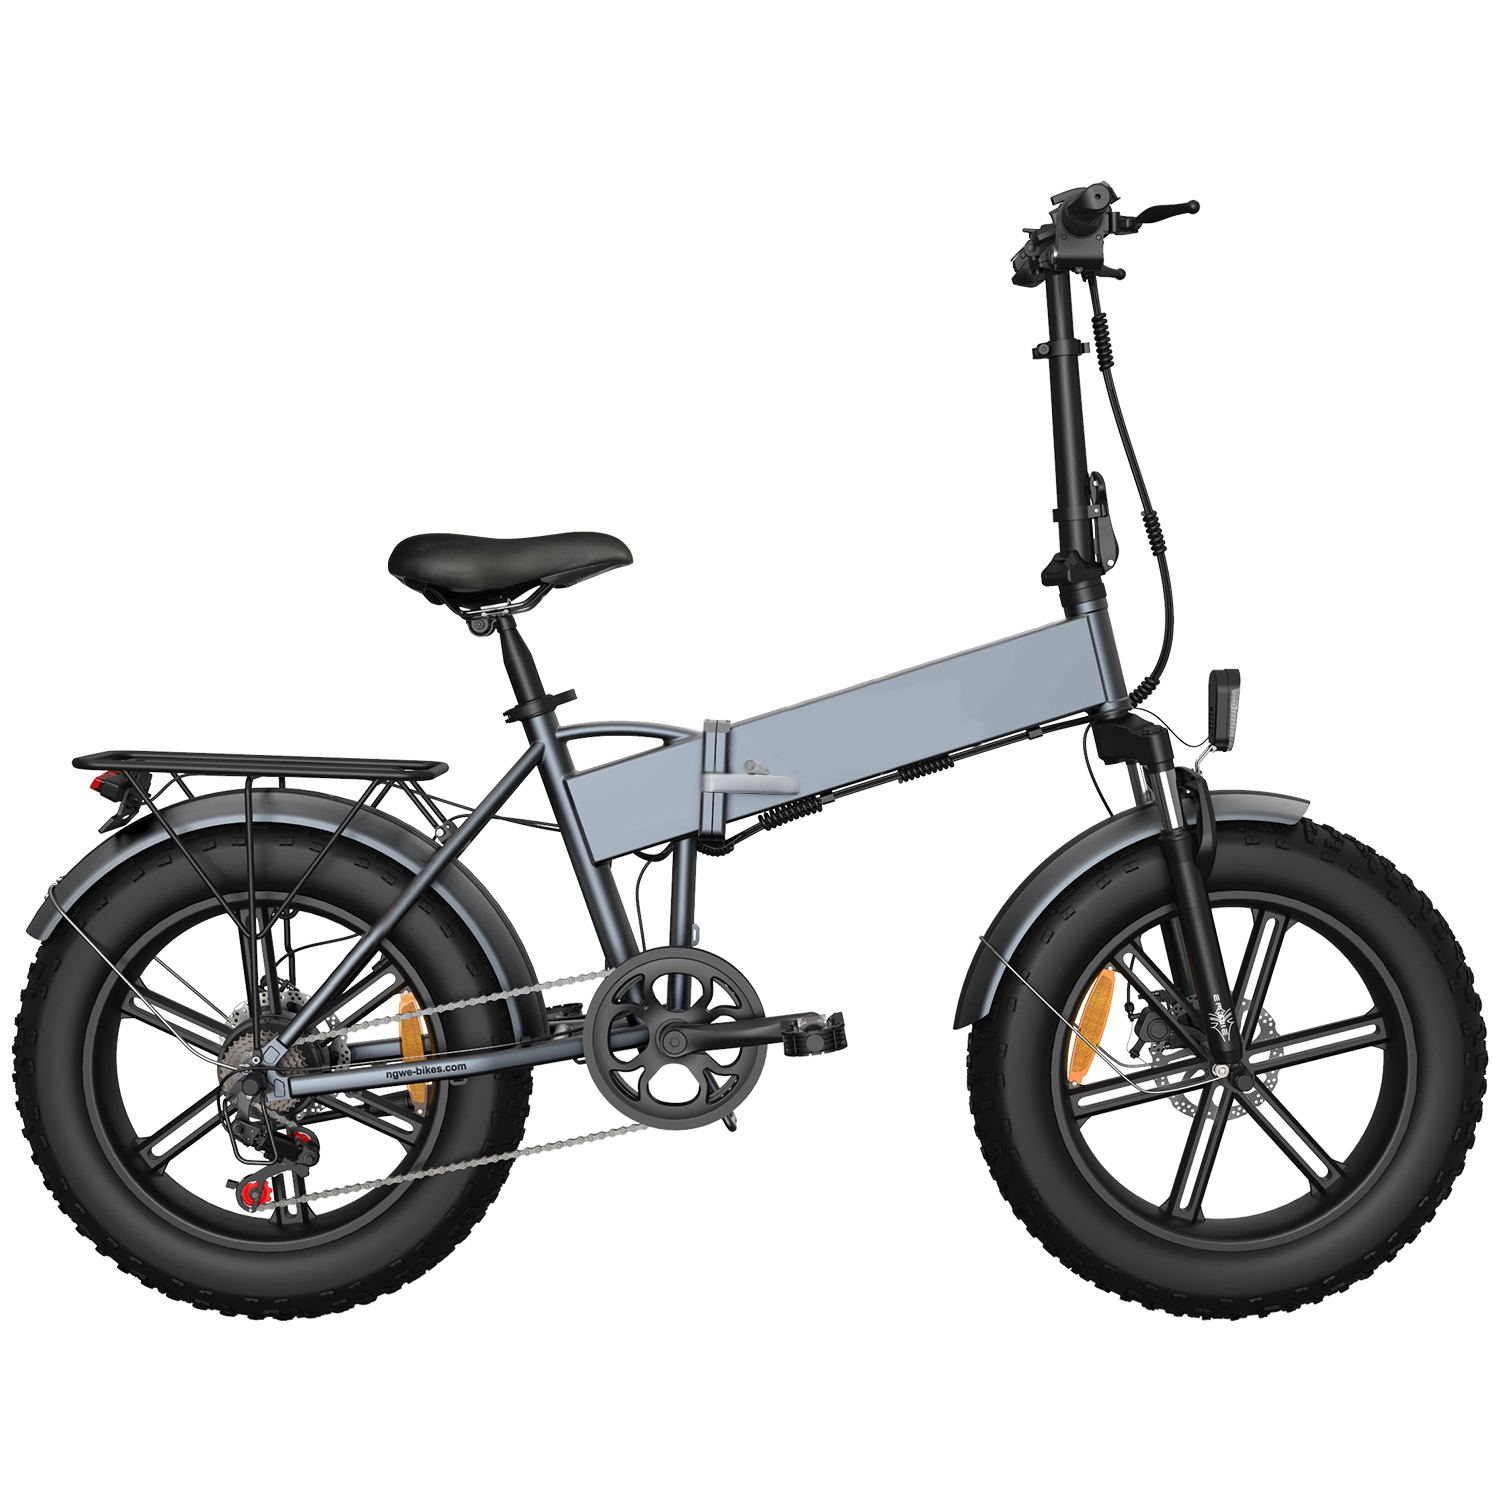 750W 13A 7 speed fat tire beach cruiser electric bicycle